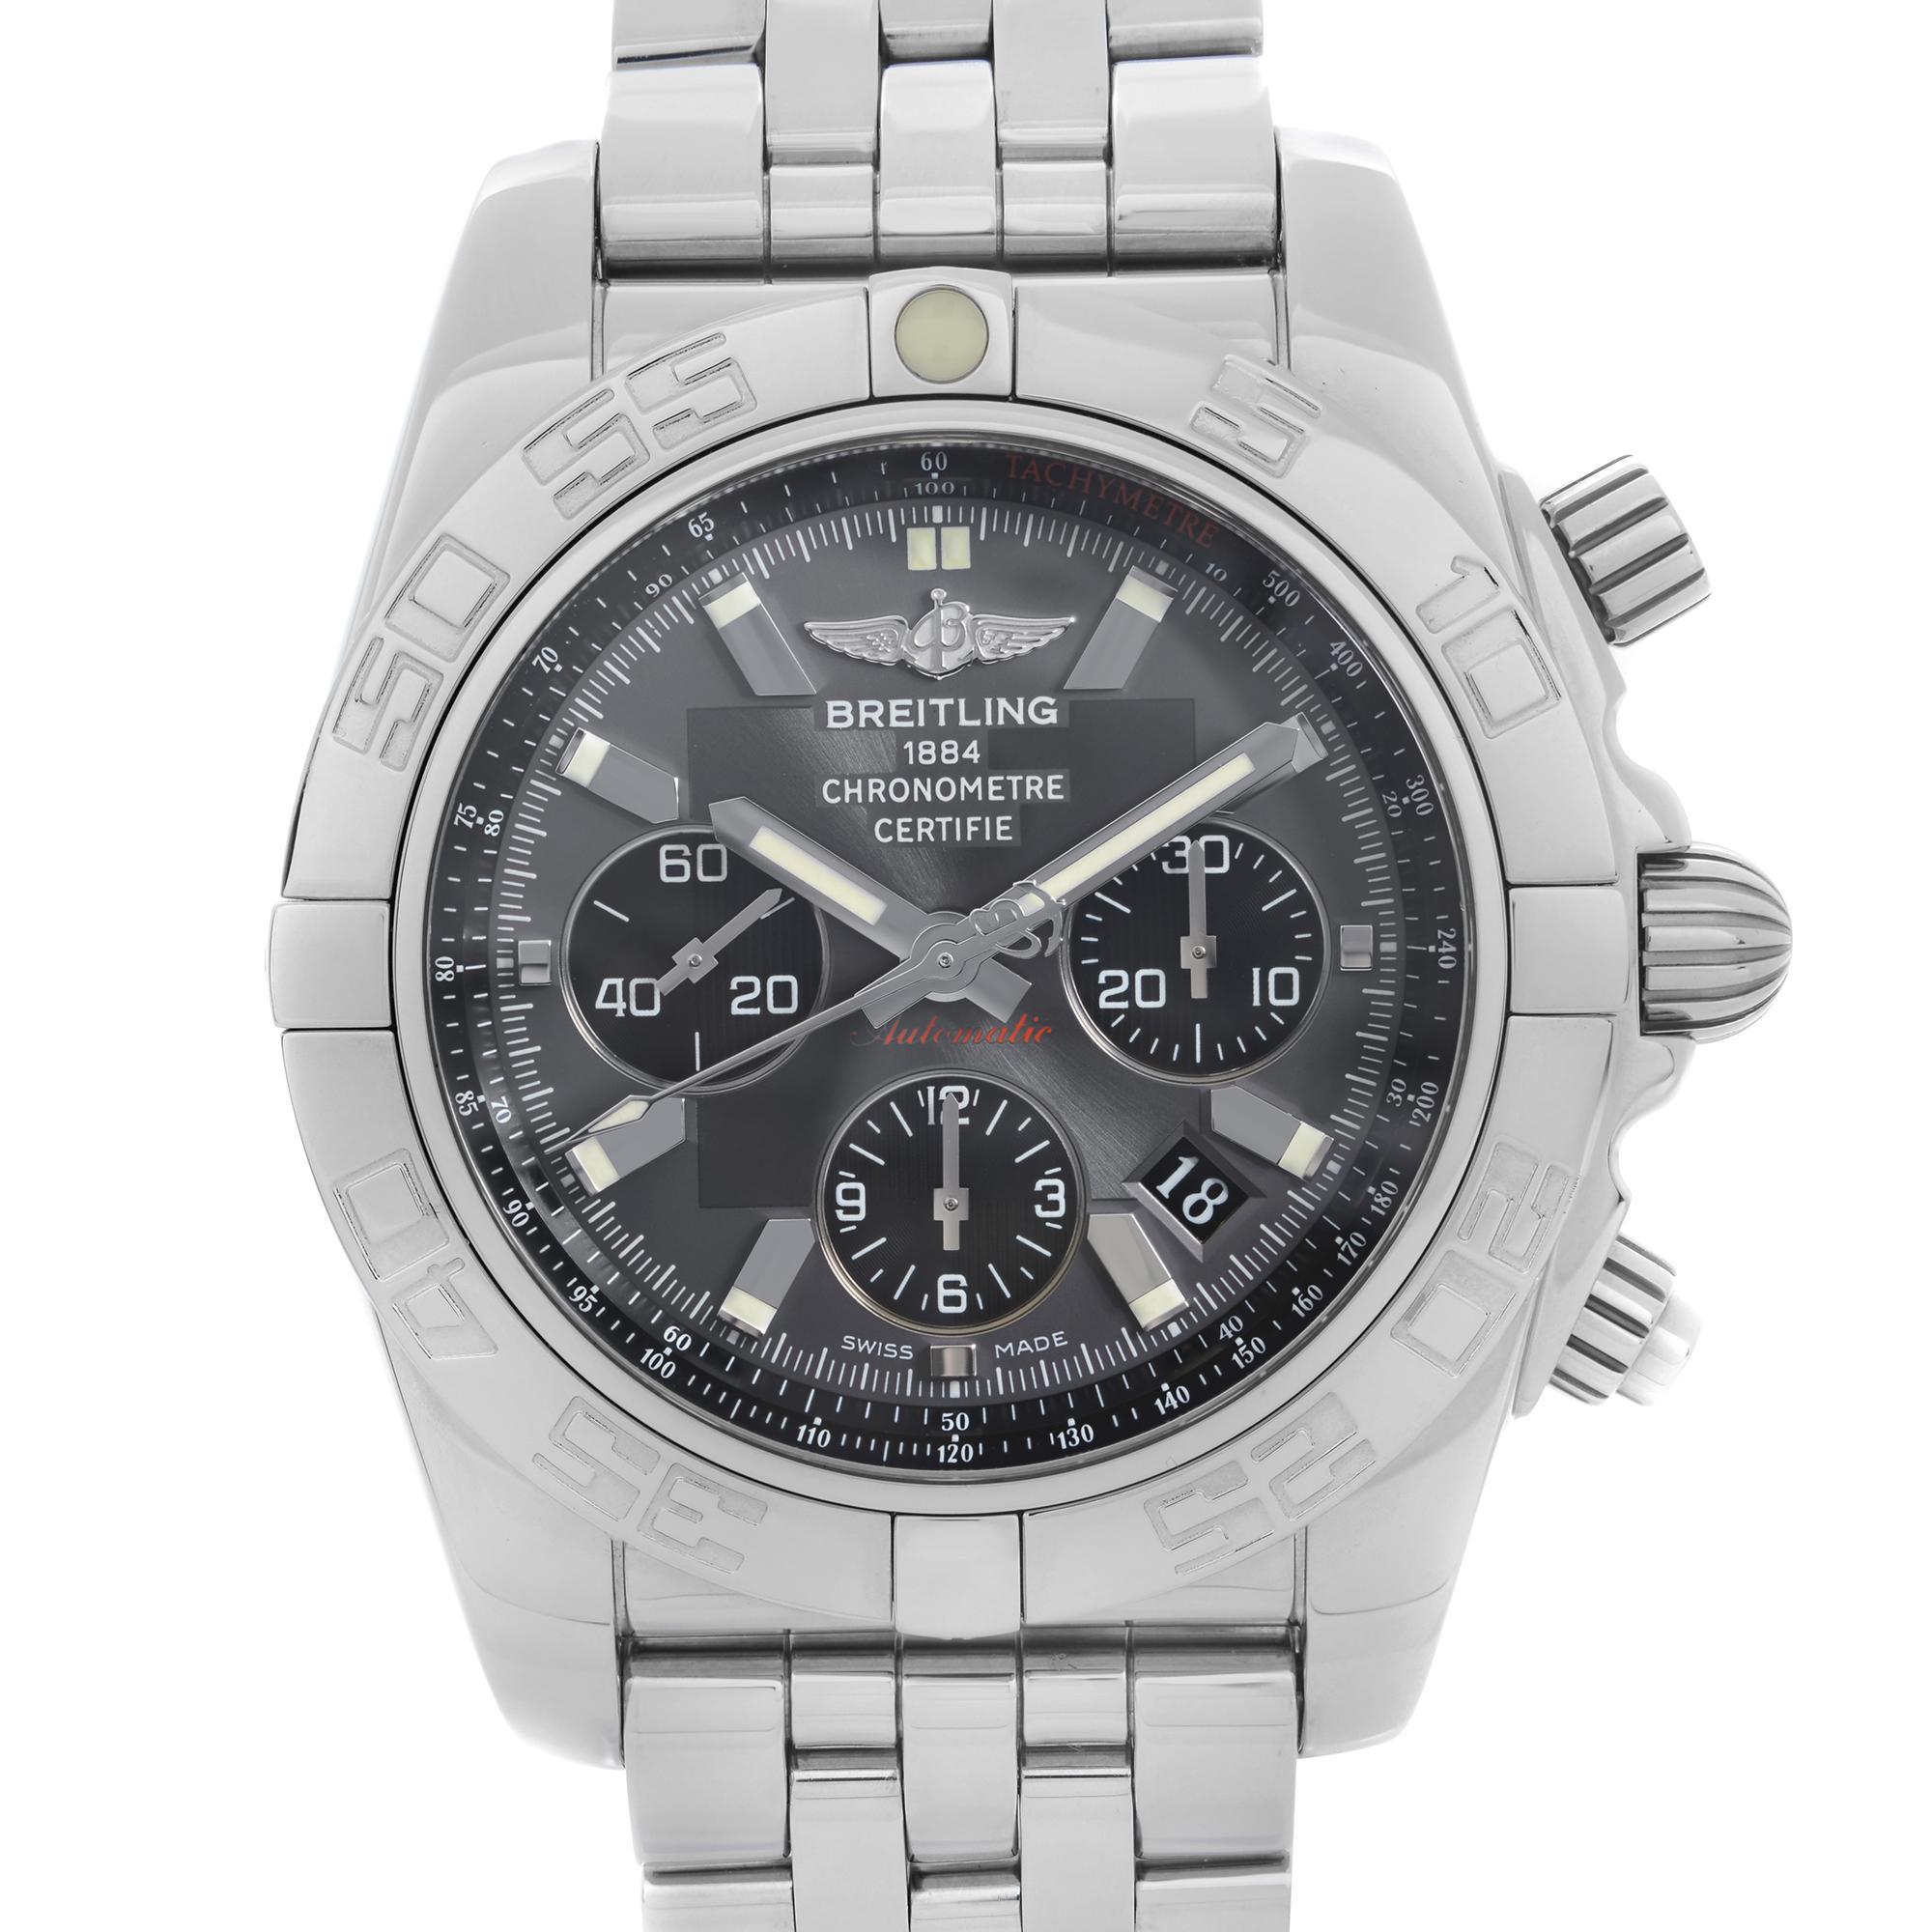 Mint Pre-owned. No box and papers.

Brand and Model Information:
Brand: Breitling
Model: Breitling Chronomat
Model Number: AB011012/F546-375A

Type and Style:
Type: Wristwatch
Style: Luxury, Sport
Department: Men
Display: Analog
Vintage: No

Design